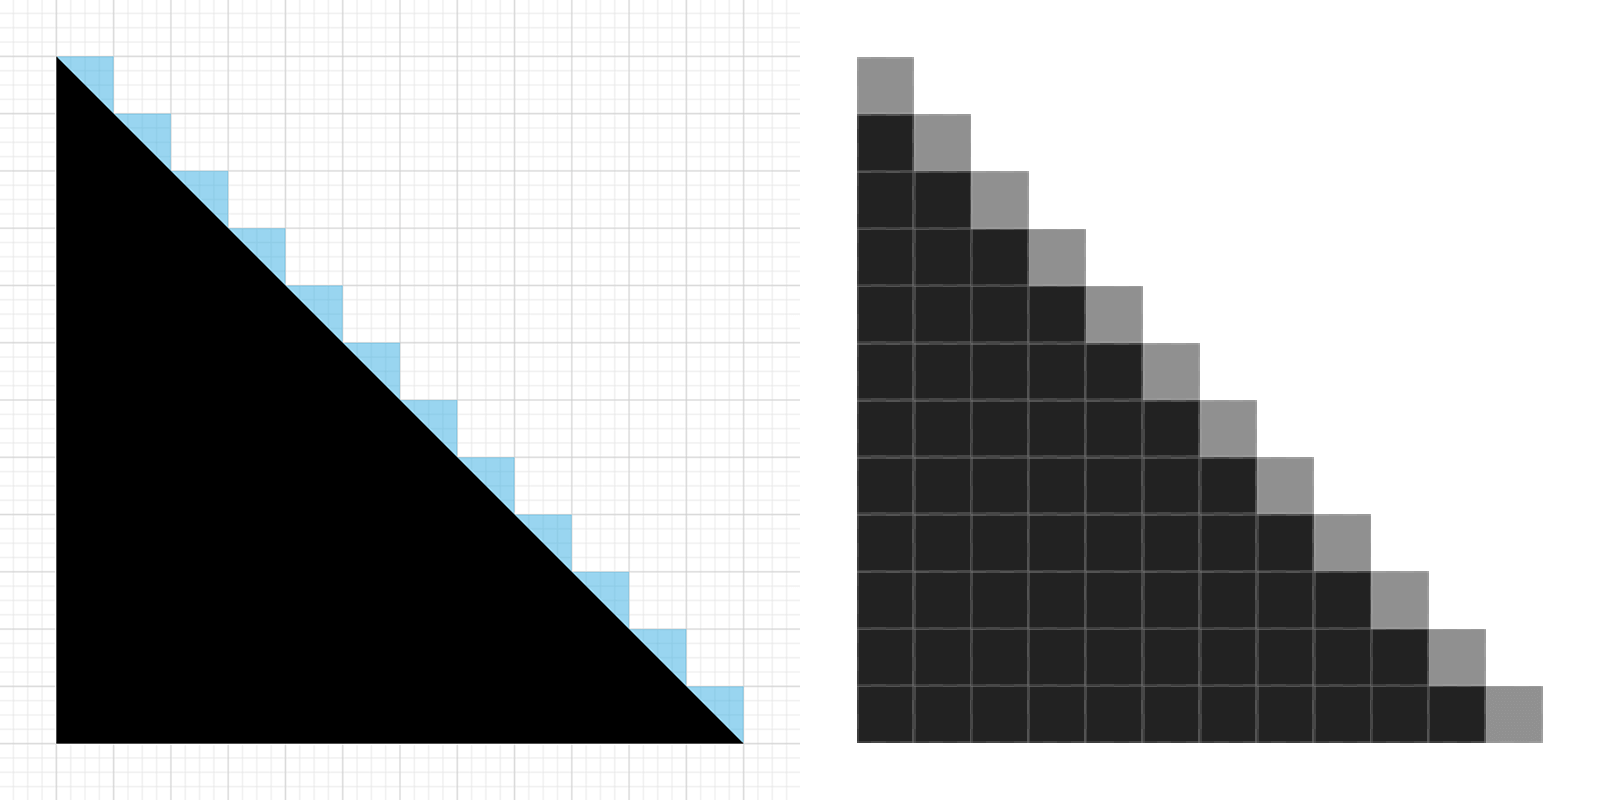 Vector design splits pixel directly in half, causing image pixels to render blurred at 50% gray.